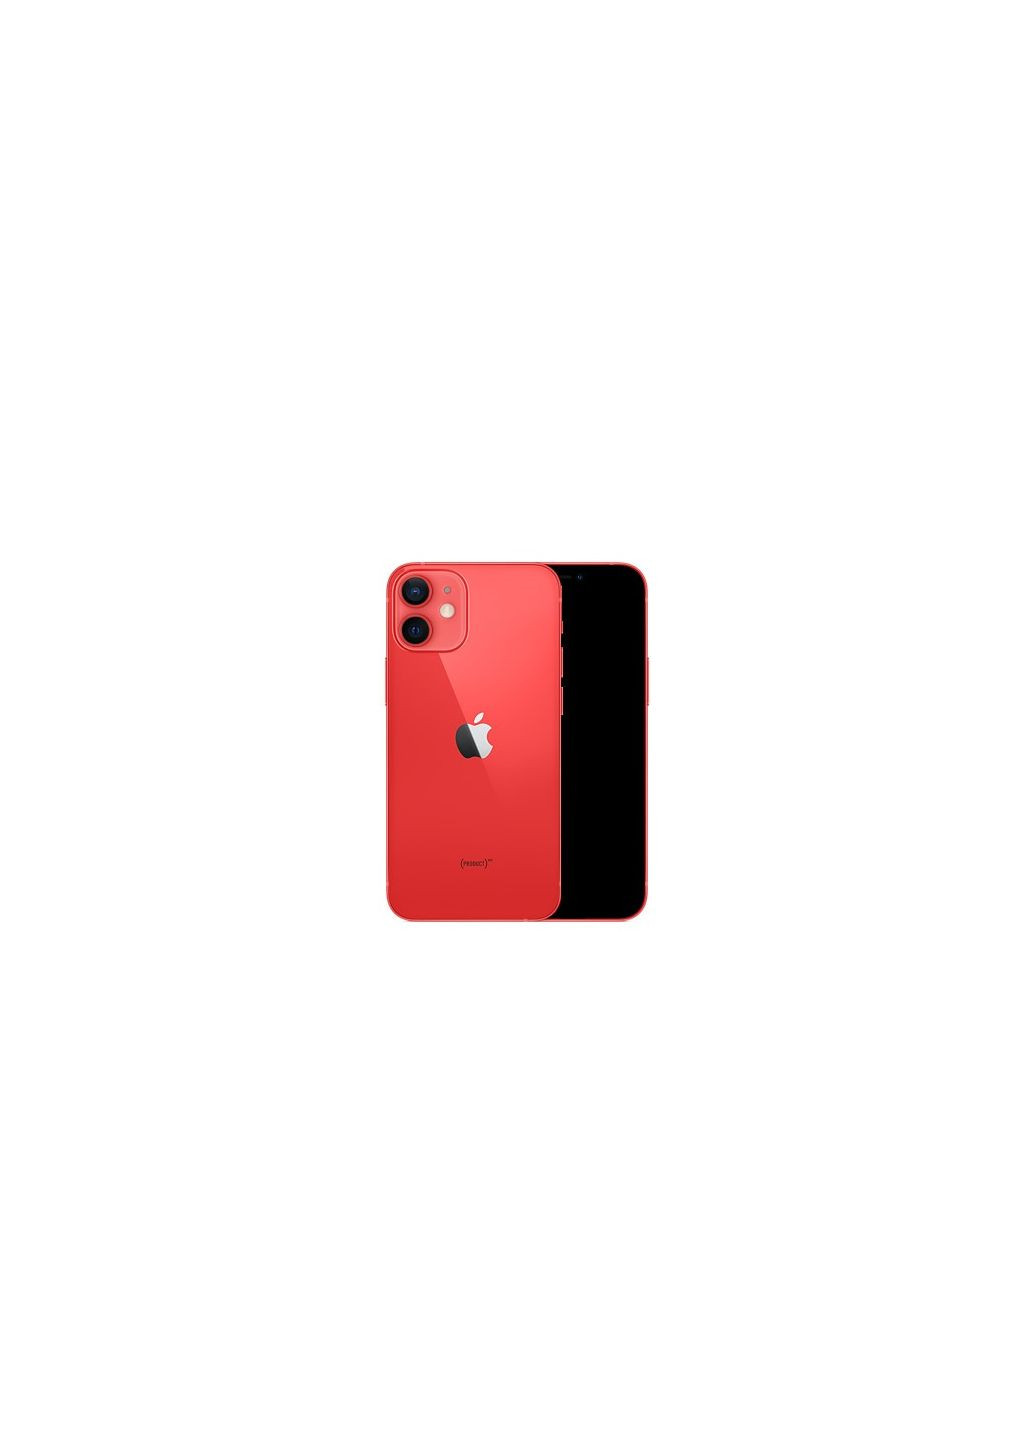 Муляж iPhone 12 Mini (PRODUCT) Red (ARM57638) No Brand (265532806)